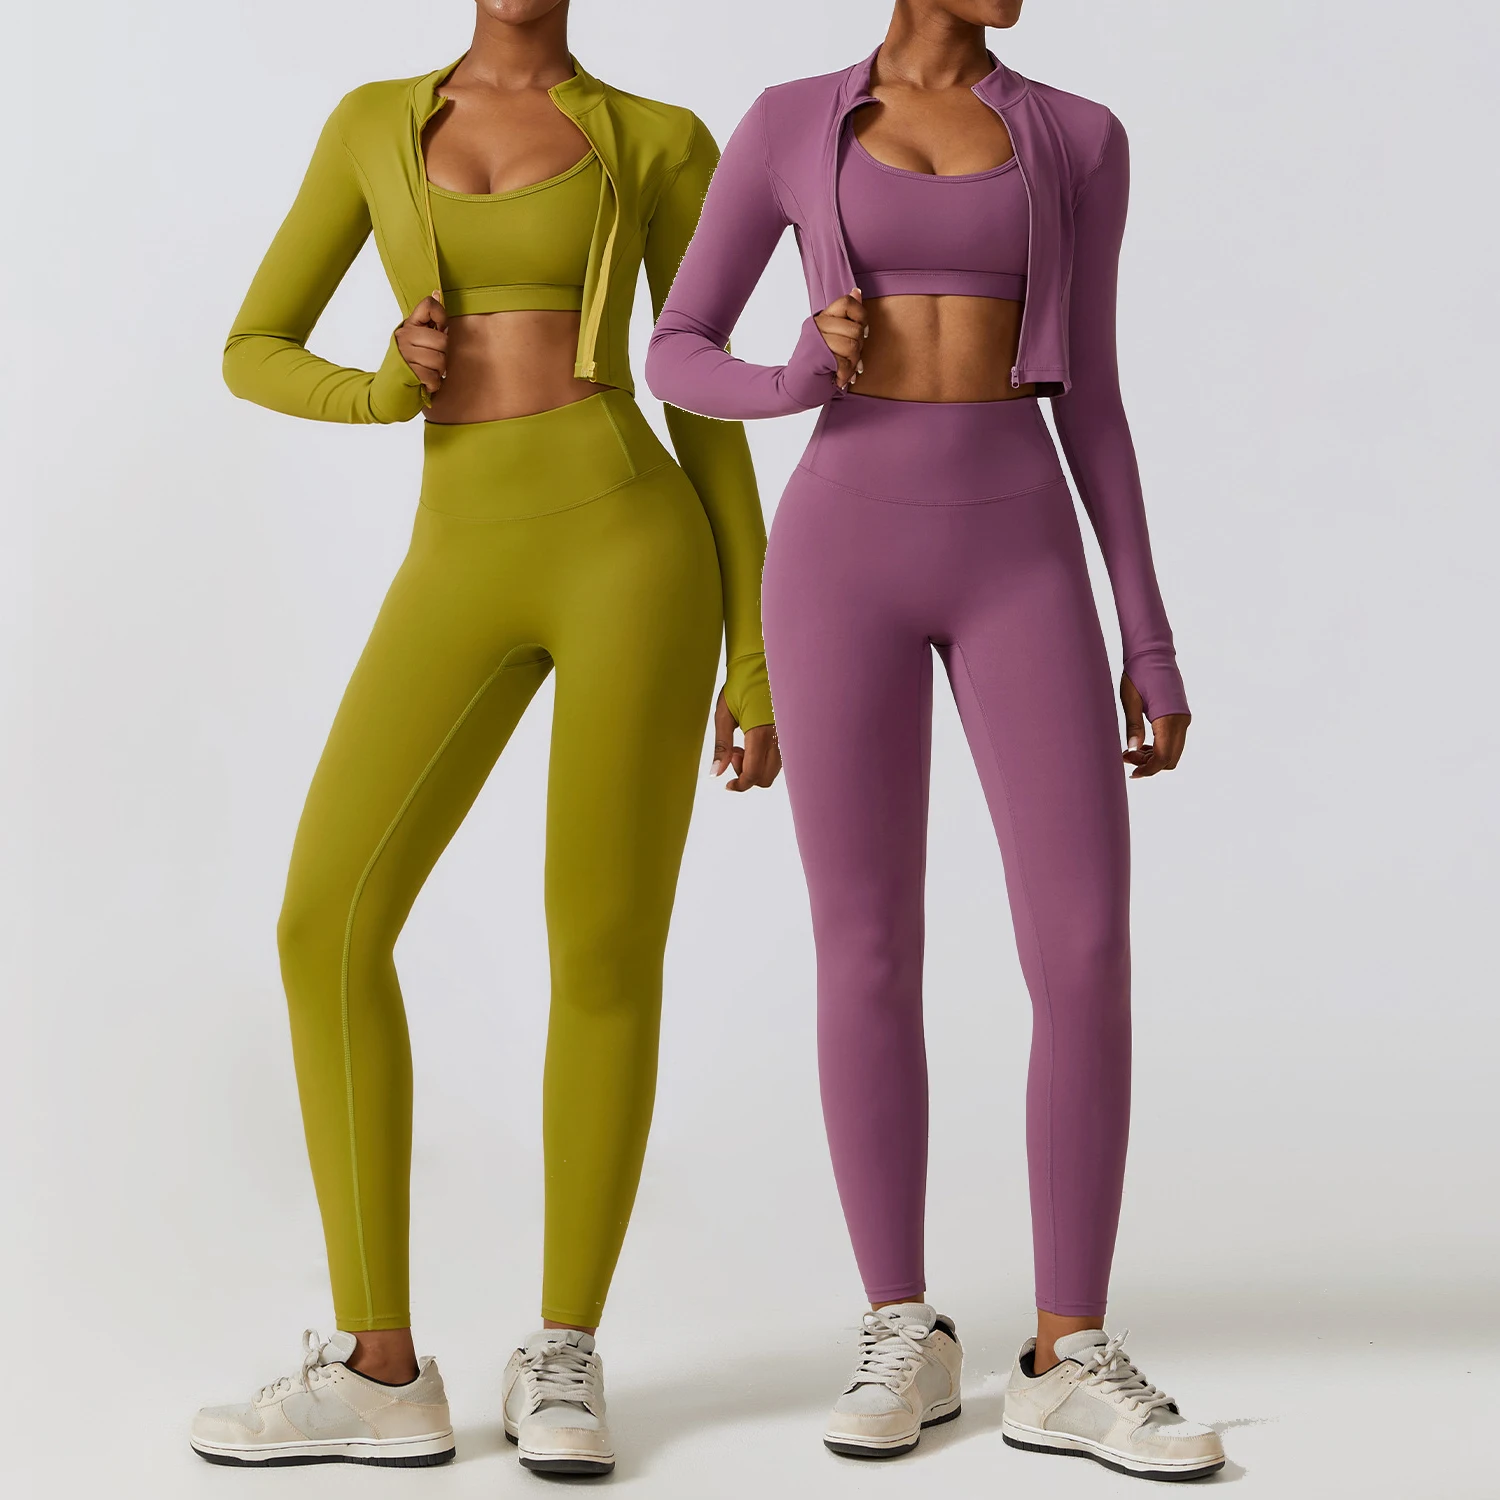 

YIYI Wholesale Comfortable Jackets Outdoor Suits 3pcs High Stretchy Gym Athletic Sets Fitness Yoga Wear Work Out Set For Women